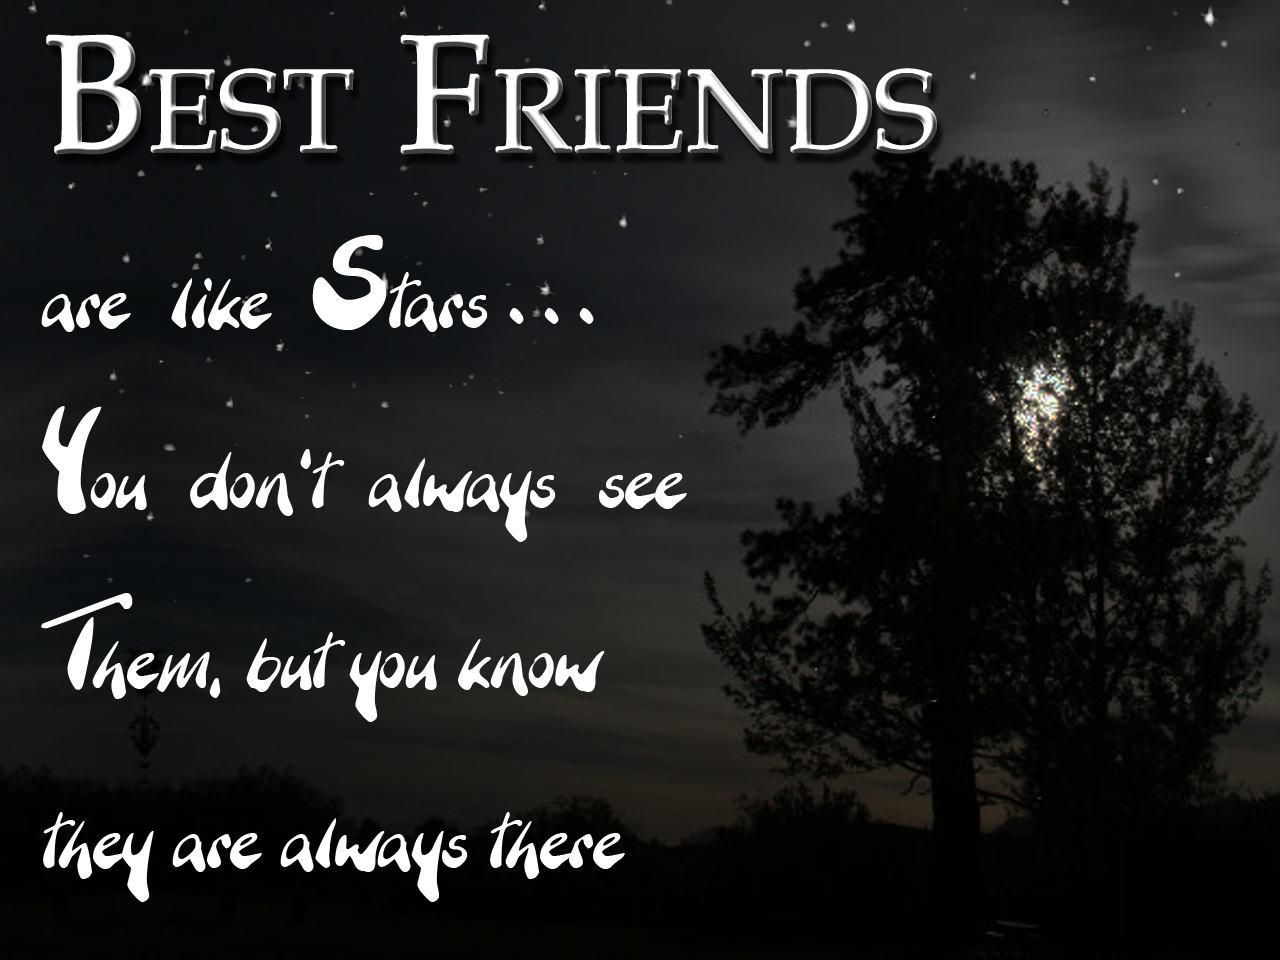 Heart Touching Quotes On Friendship Wallpapers